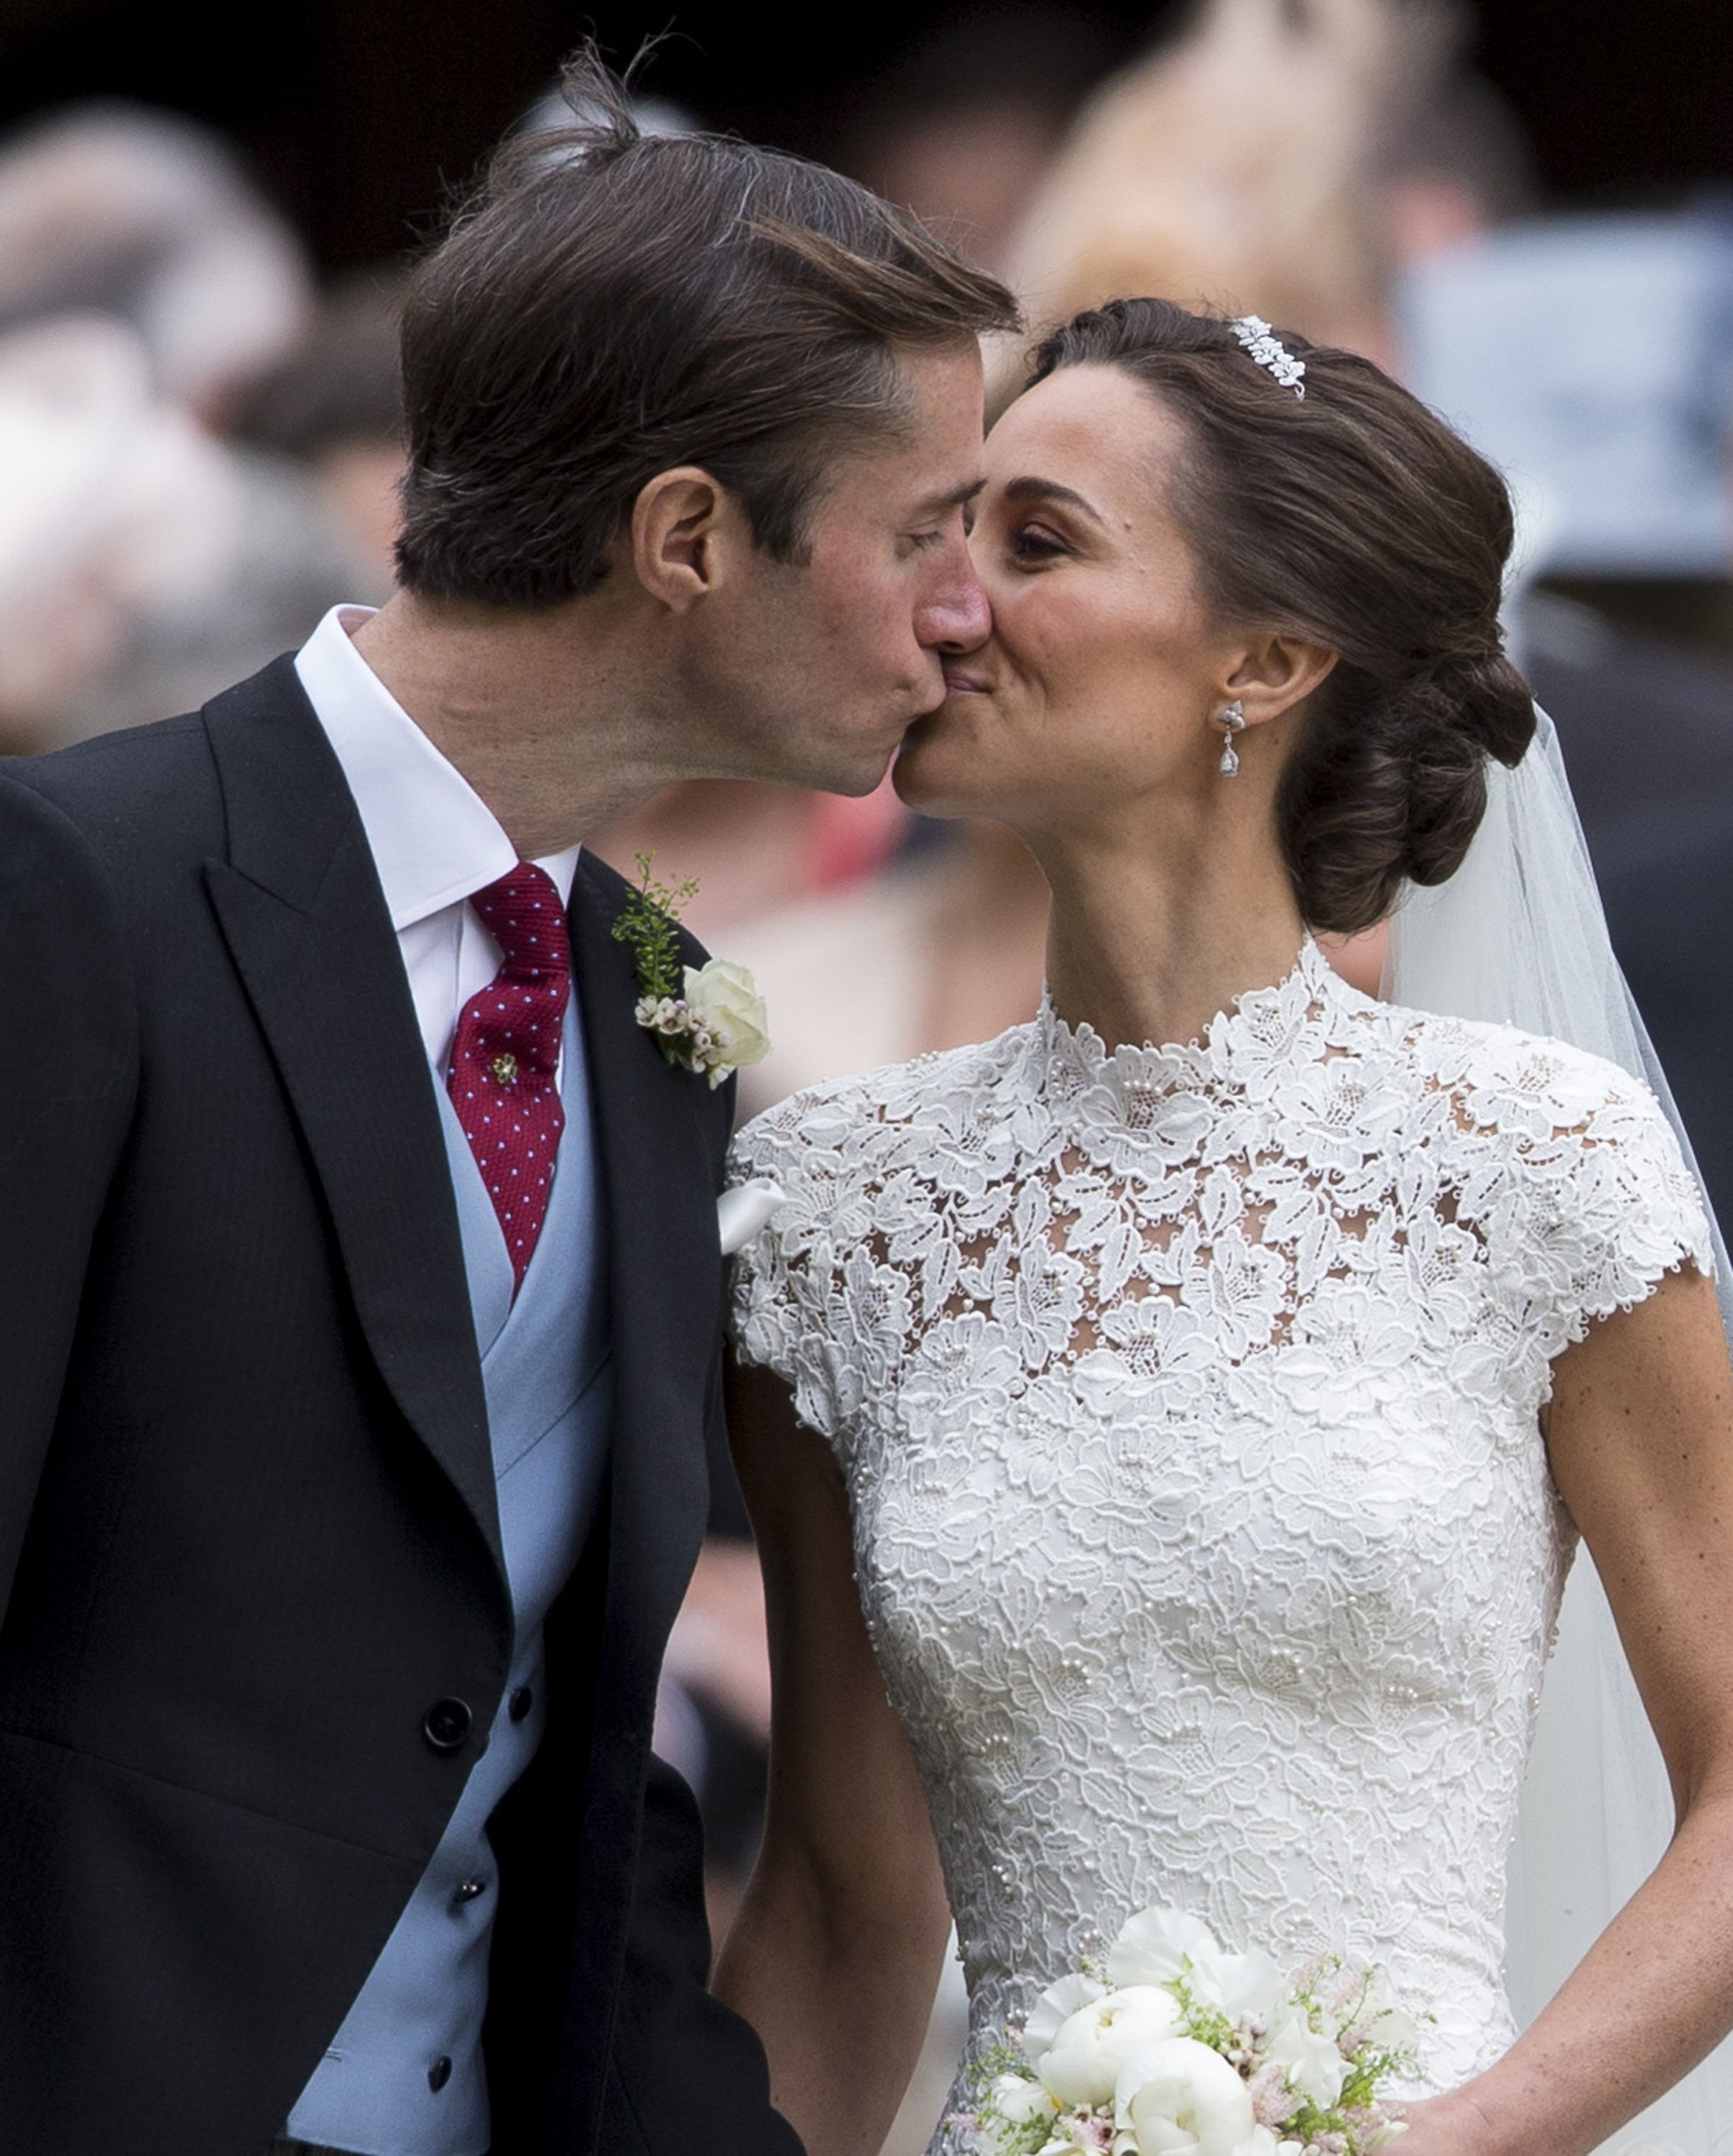 James Matthews and Pippa Middleton after their wedding at St Mark's Church on May 20, 2017 in Englefield Green, England. | Source: Getty Images